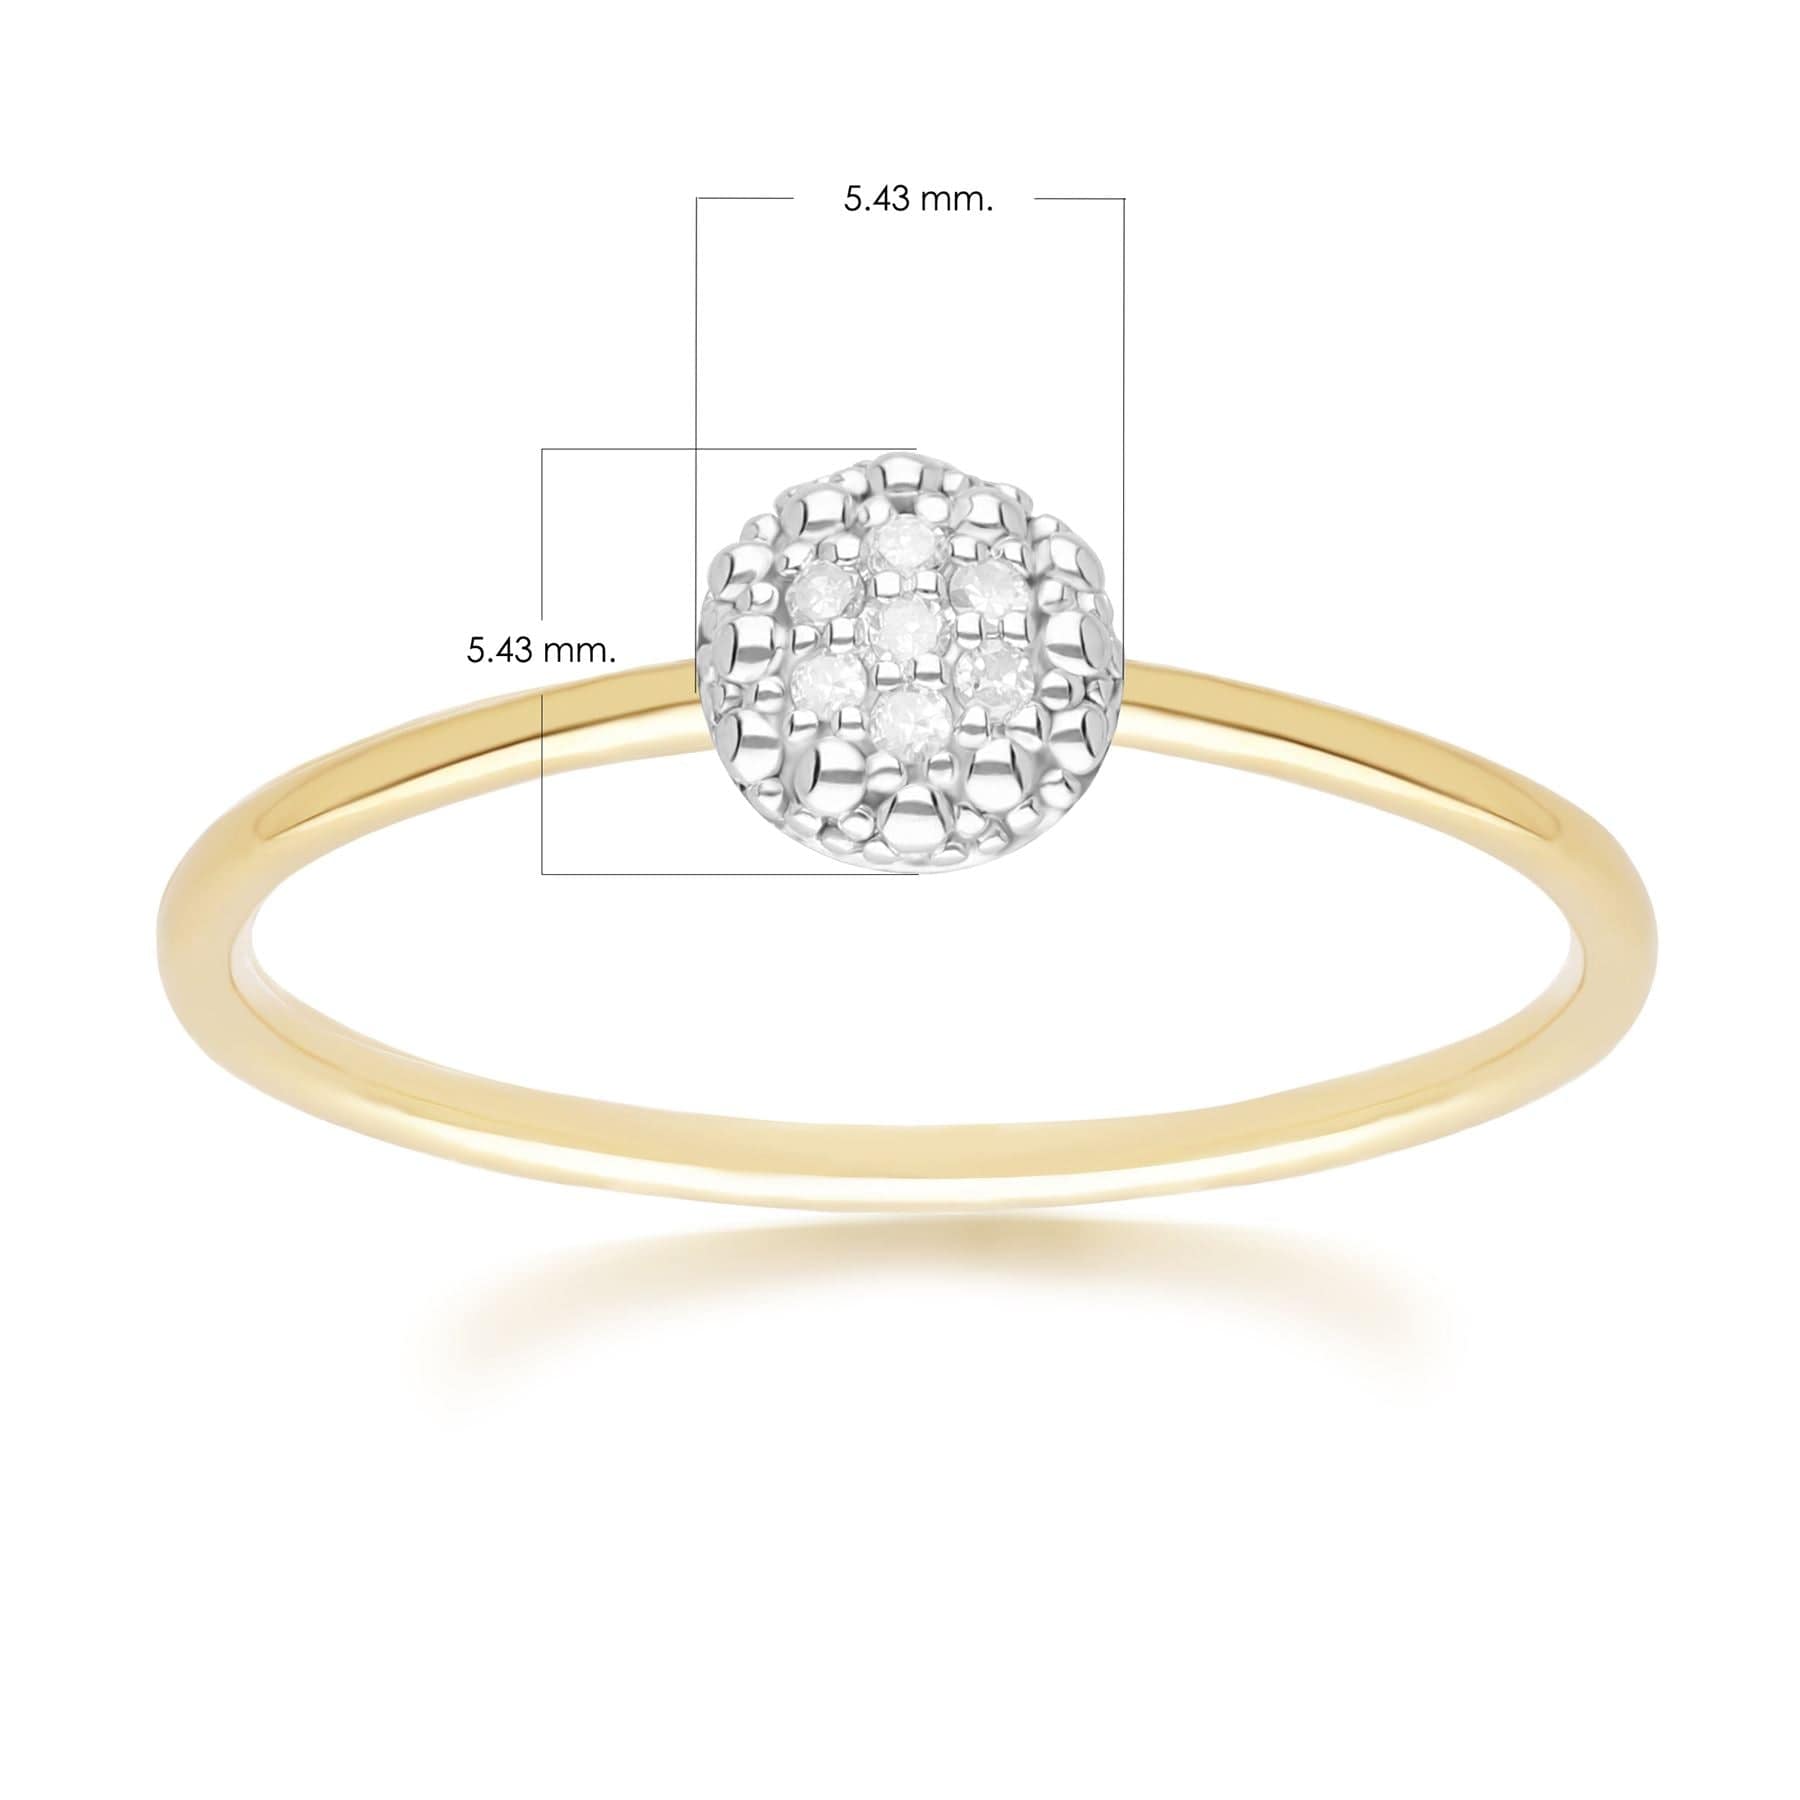 191R0928019 Diamond Pave Round Ring in 9ct Yellow Gold Dimensions